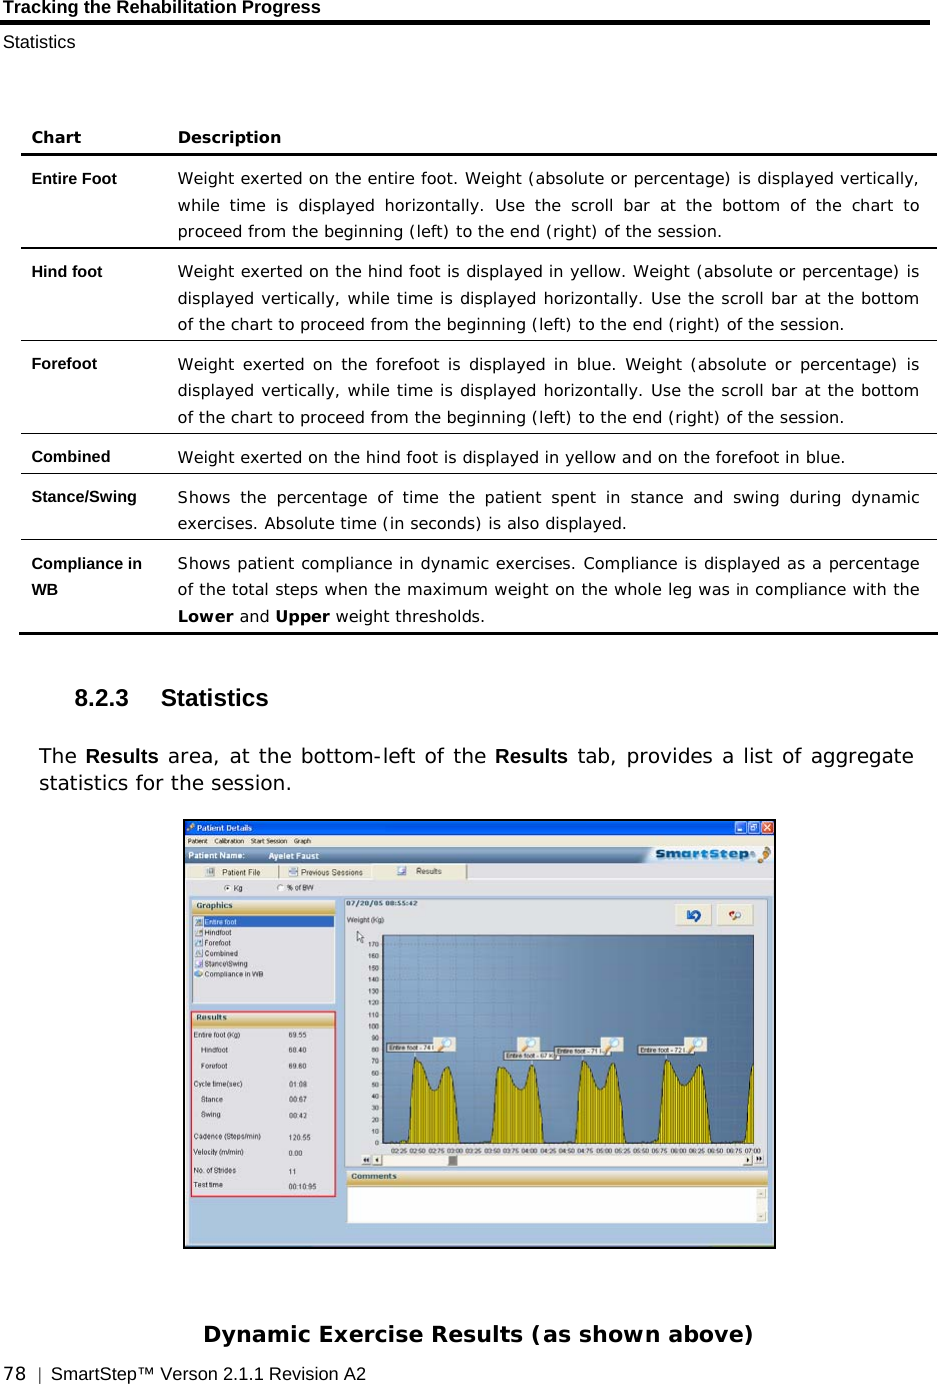 Tracking the Rehabilitation Progress Statistics  78  |  SmartStep™ Verson 2.1.1 Revision A2    Chart Description Entire Foot  Weight exerted on the entire foot. Weight (absolute or percentage) is displayed vertically, while time is displayed horizontally. Use the scroll bar at the bottom of the chart to proceed from the beginning (left) to the end (right) of the session. Hind foot  Weight exerted on the hind foot is displayed in yellow. Weight (absolute or percentage) is displayed vertically, while time is displayed horizontally. Use the scroll bar at the bottom of the chart to proceed from the beginning (left) to the end (right) of the session. Forefoot  Weight exerted on the forefoot is displayed in blue. Weight (absolute or percentage) is displayed vertically, while time is displayed horizontally. Use the scroll bar at the bottom of the chart to proceed from the beginning (left) to the end (right) of the session. Combined  Weight exerted on the hind foot is displayed in yellow and on the forefoot in blue. Stance/Swing  Shows the percentage of time the patient spent in stance and swing during dynamic exercises. Absolute time (in seconds) is also displayed.  Compliance in WB Shows patient compliance in dynamic exercises. Compliance is displayed as a percentage of the total steps when the maximum weight on the whole leg was in compliance with the Lower and Upper weight thresholds.   8.2.3 Statistics The Results area, at the bottom-left of the Results tab, provides a list of aggregate statistics for the session.    Dynamic Exercise Results (as shown above) 